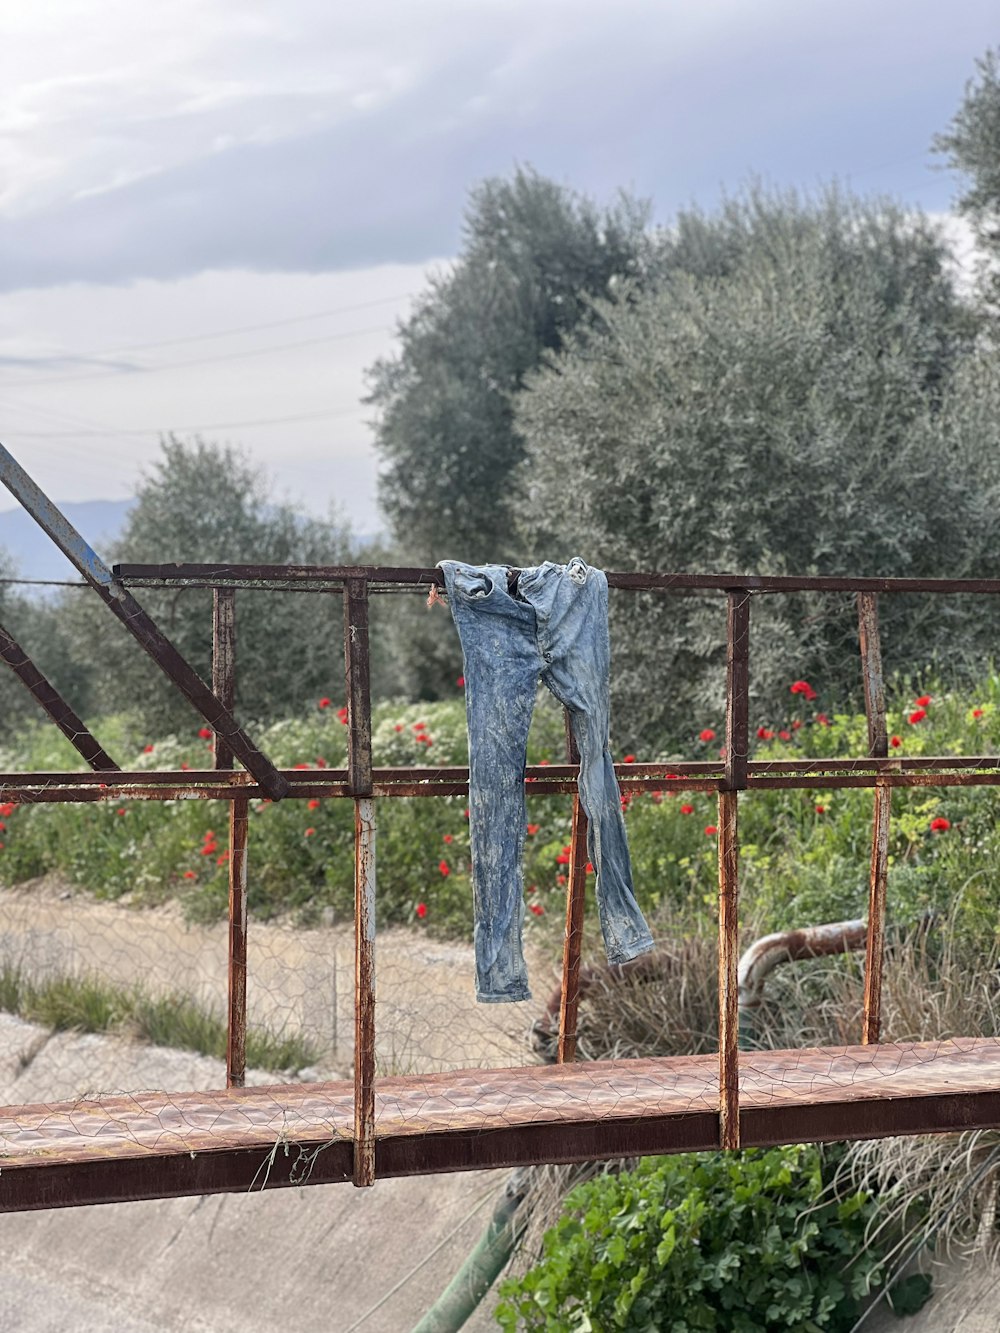 a pair of jeans hanging on a rusty rail